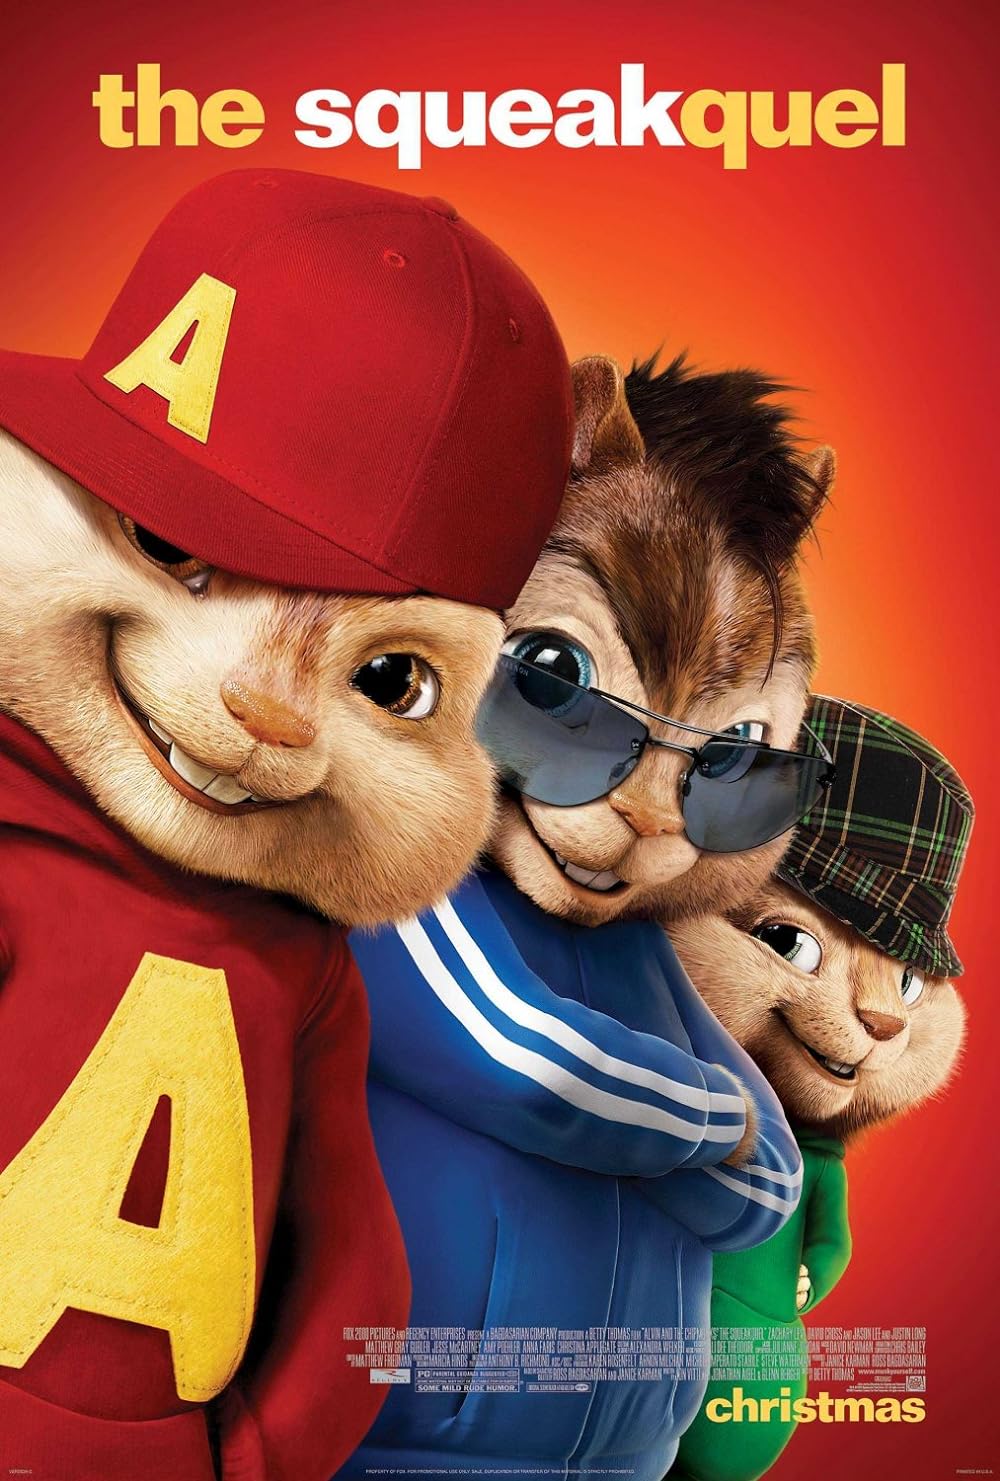 which chipmunk is getting the best head